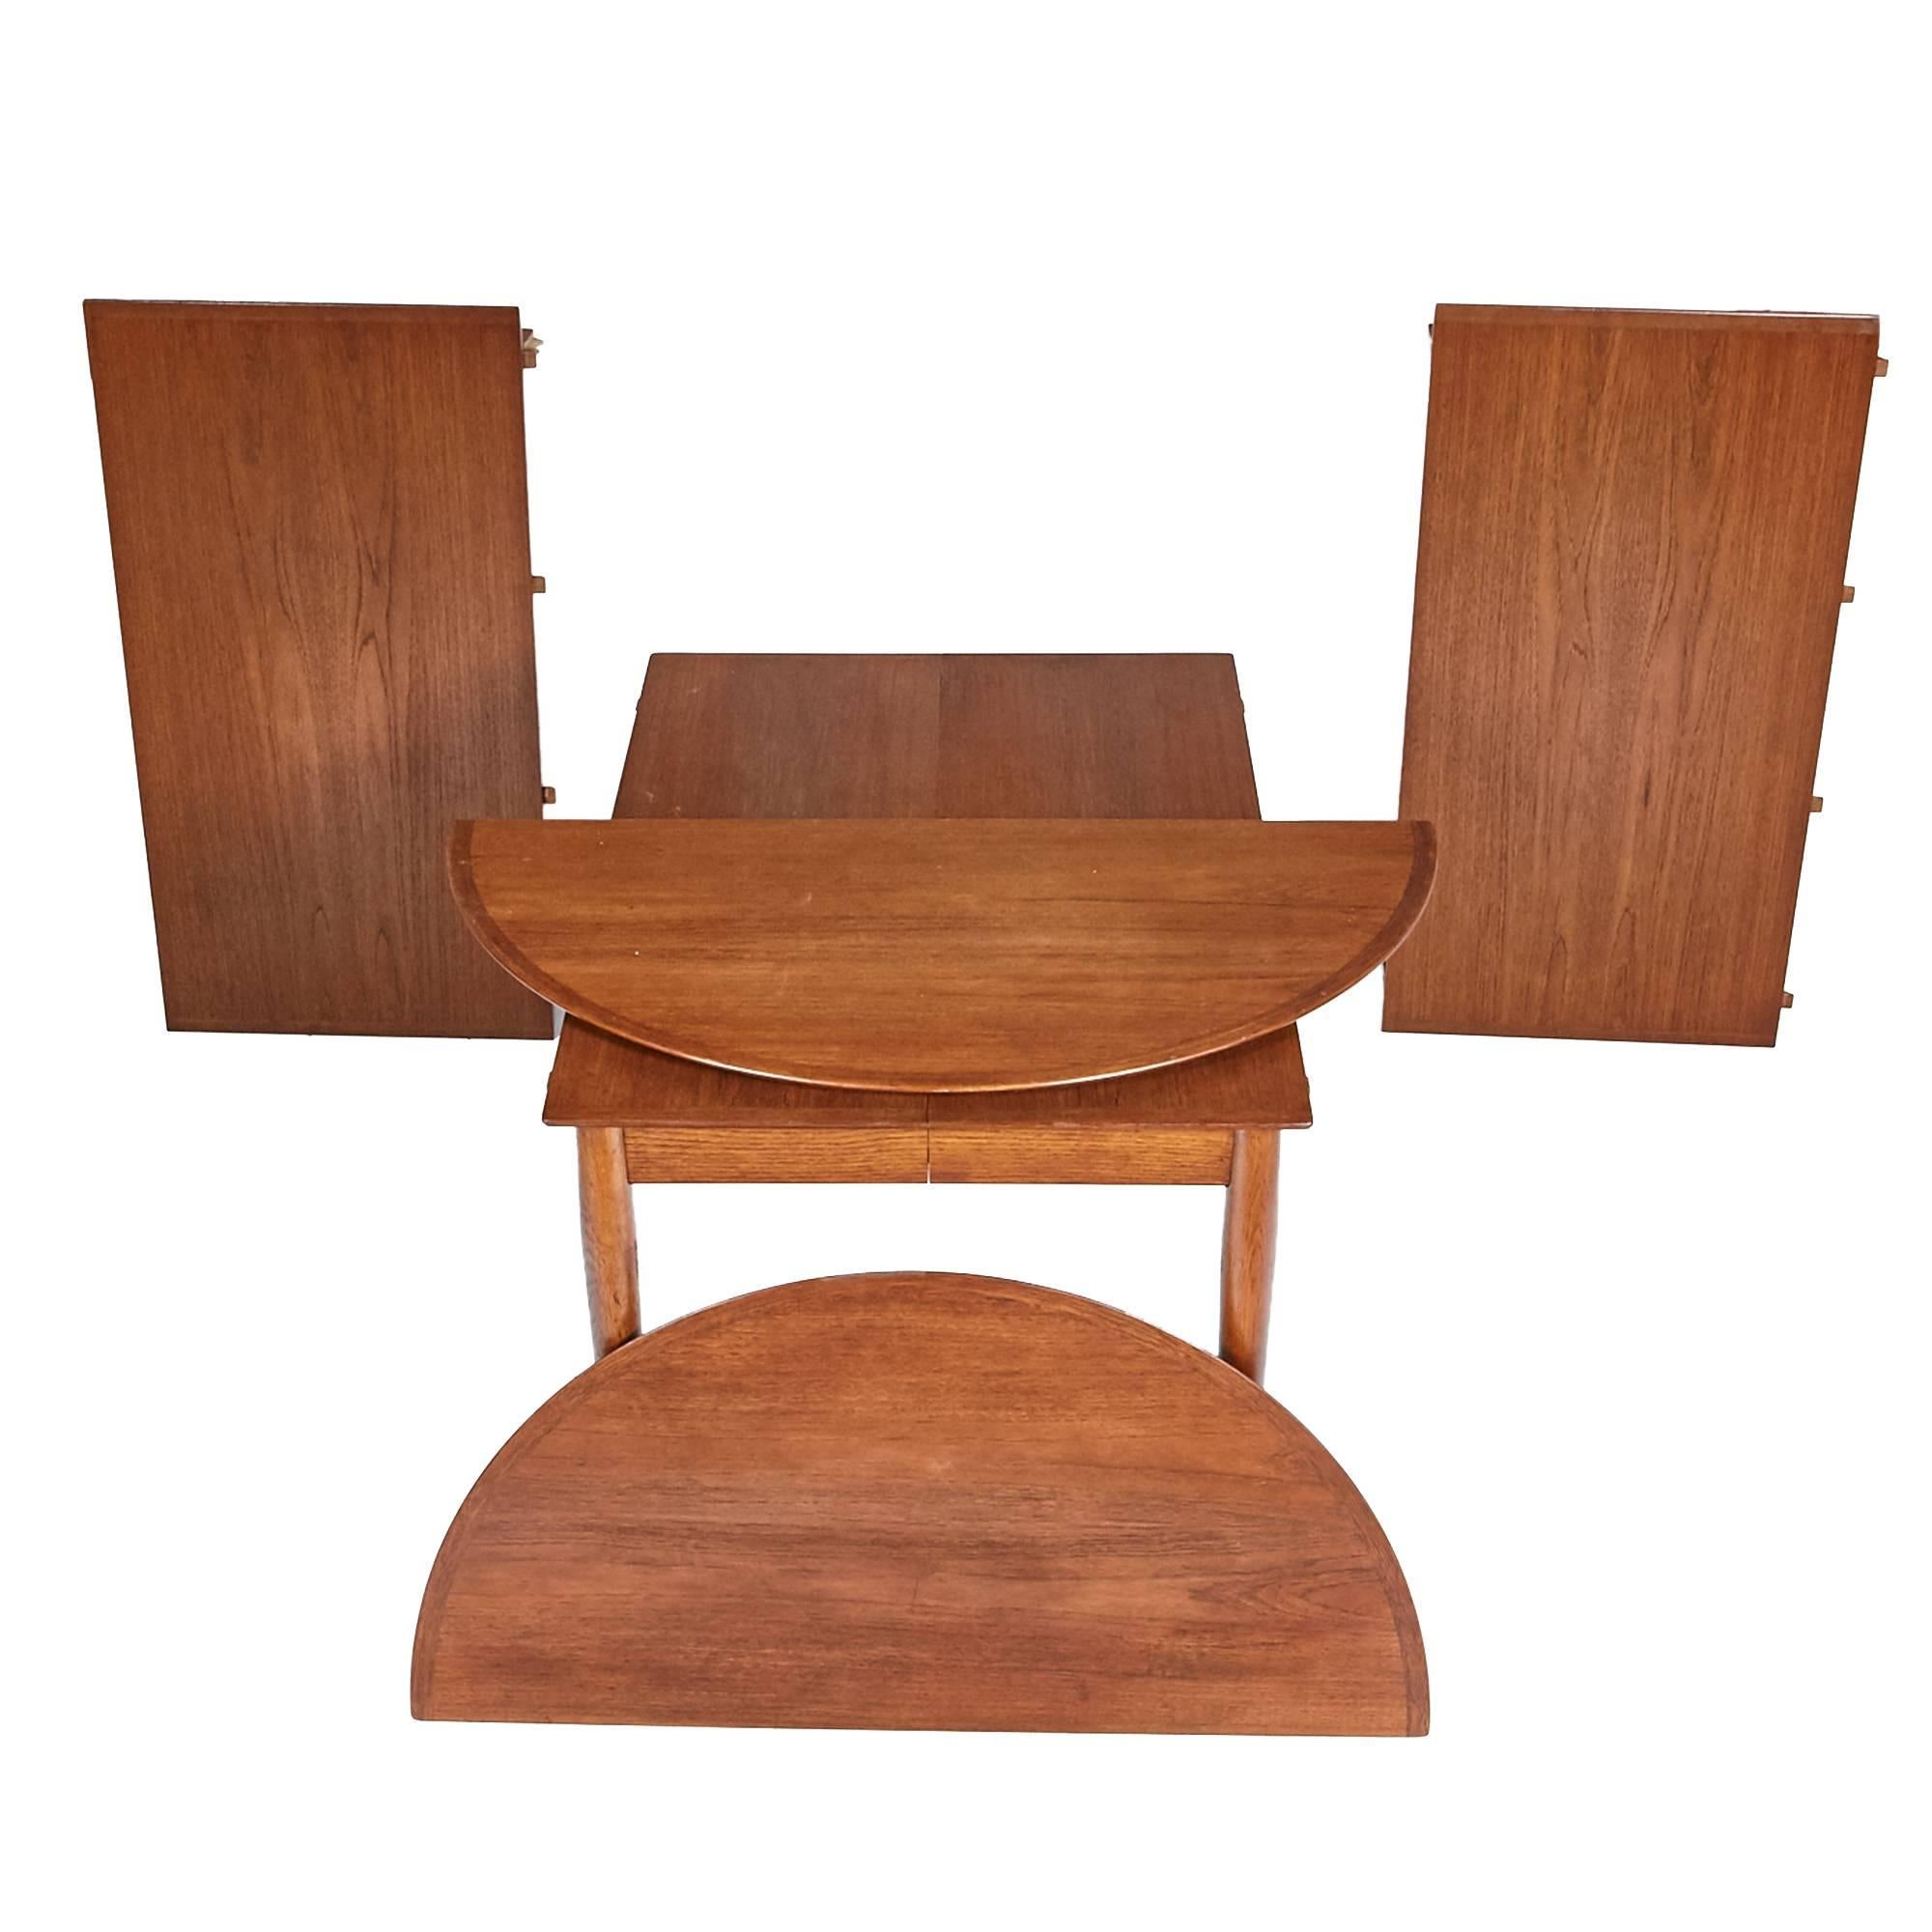 20th Century Arne Vodder for George Tanier by Sibast Mobler Extension Dining Table